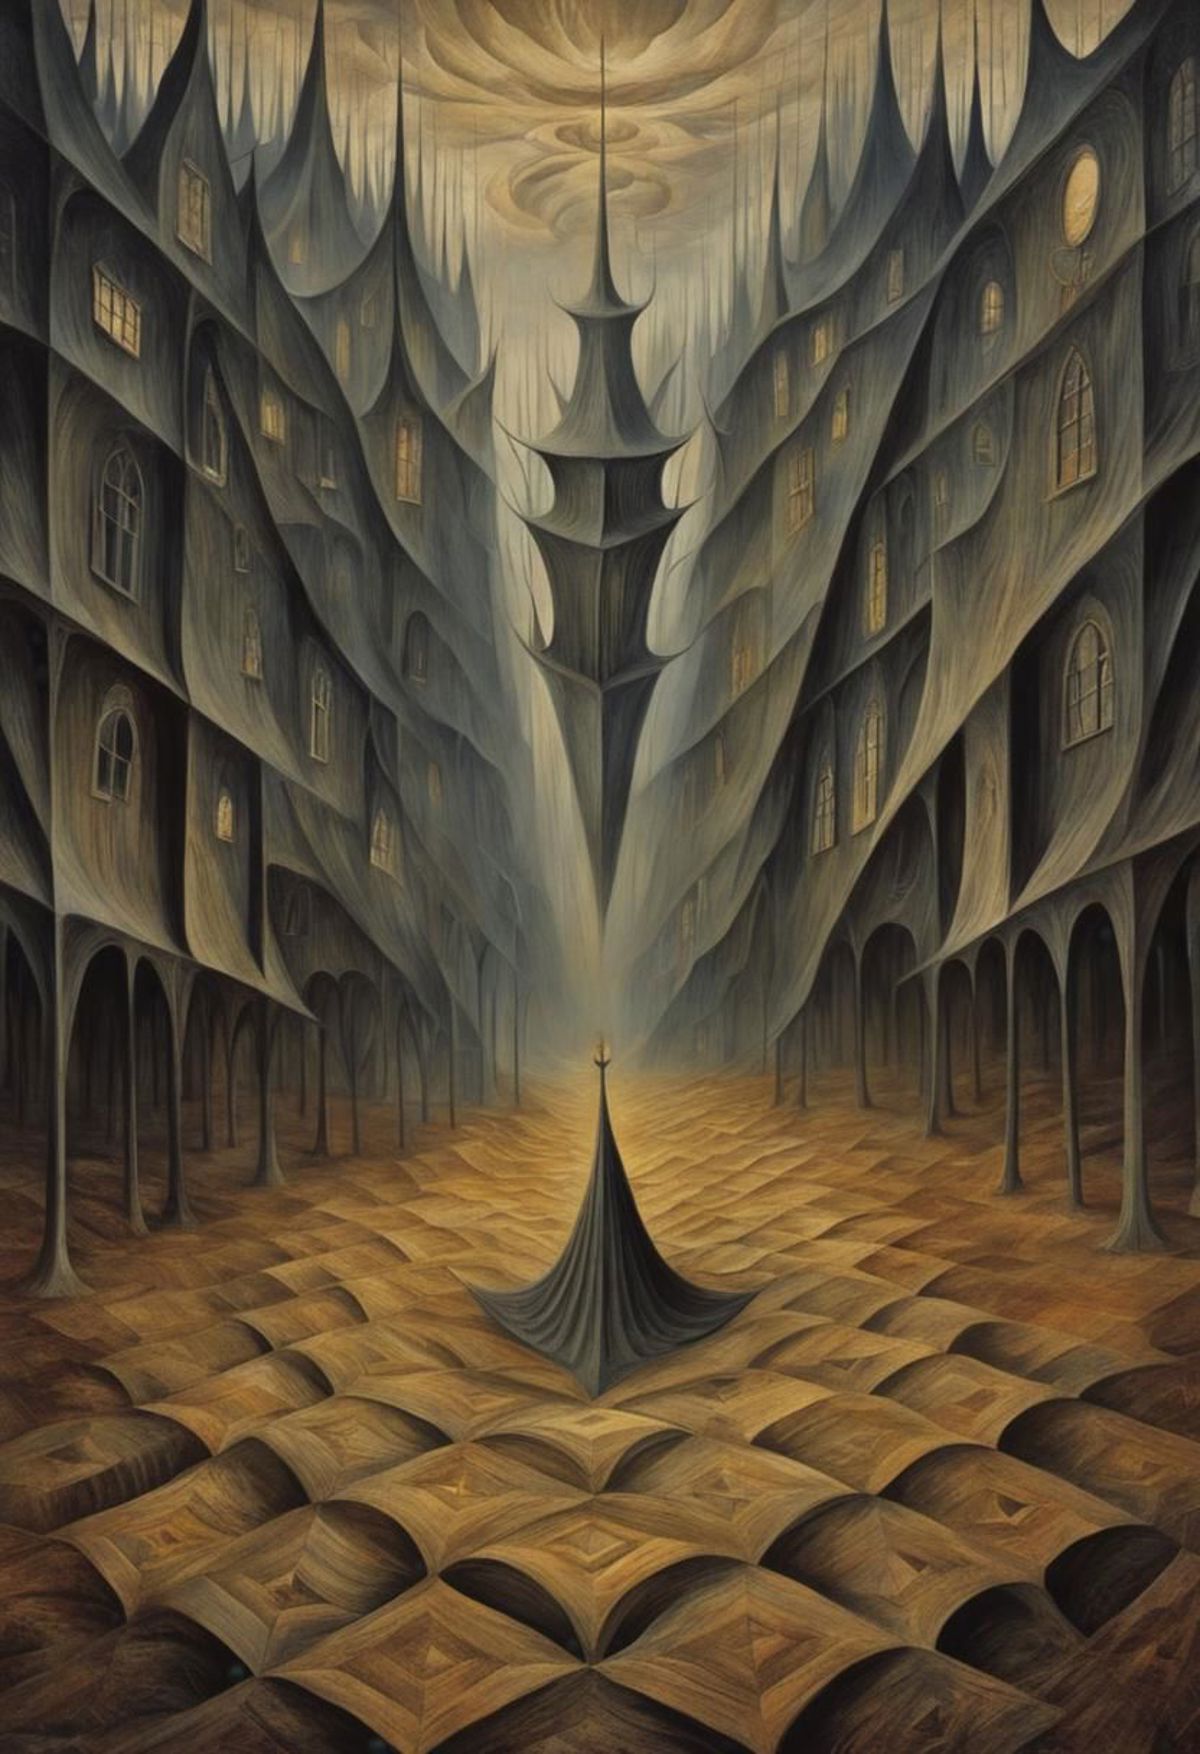 Remedios Varo Style image by beg0n